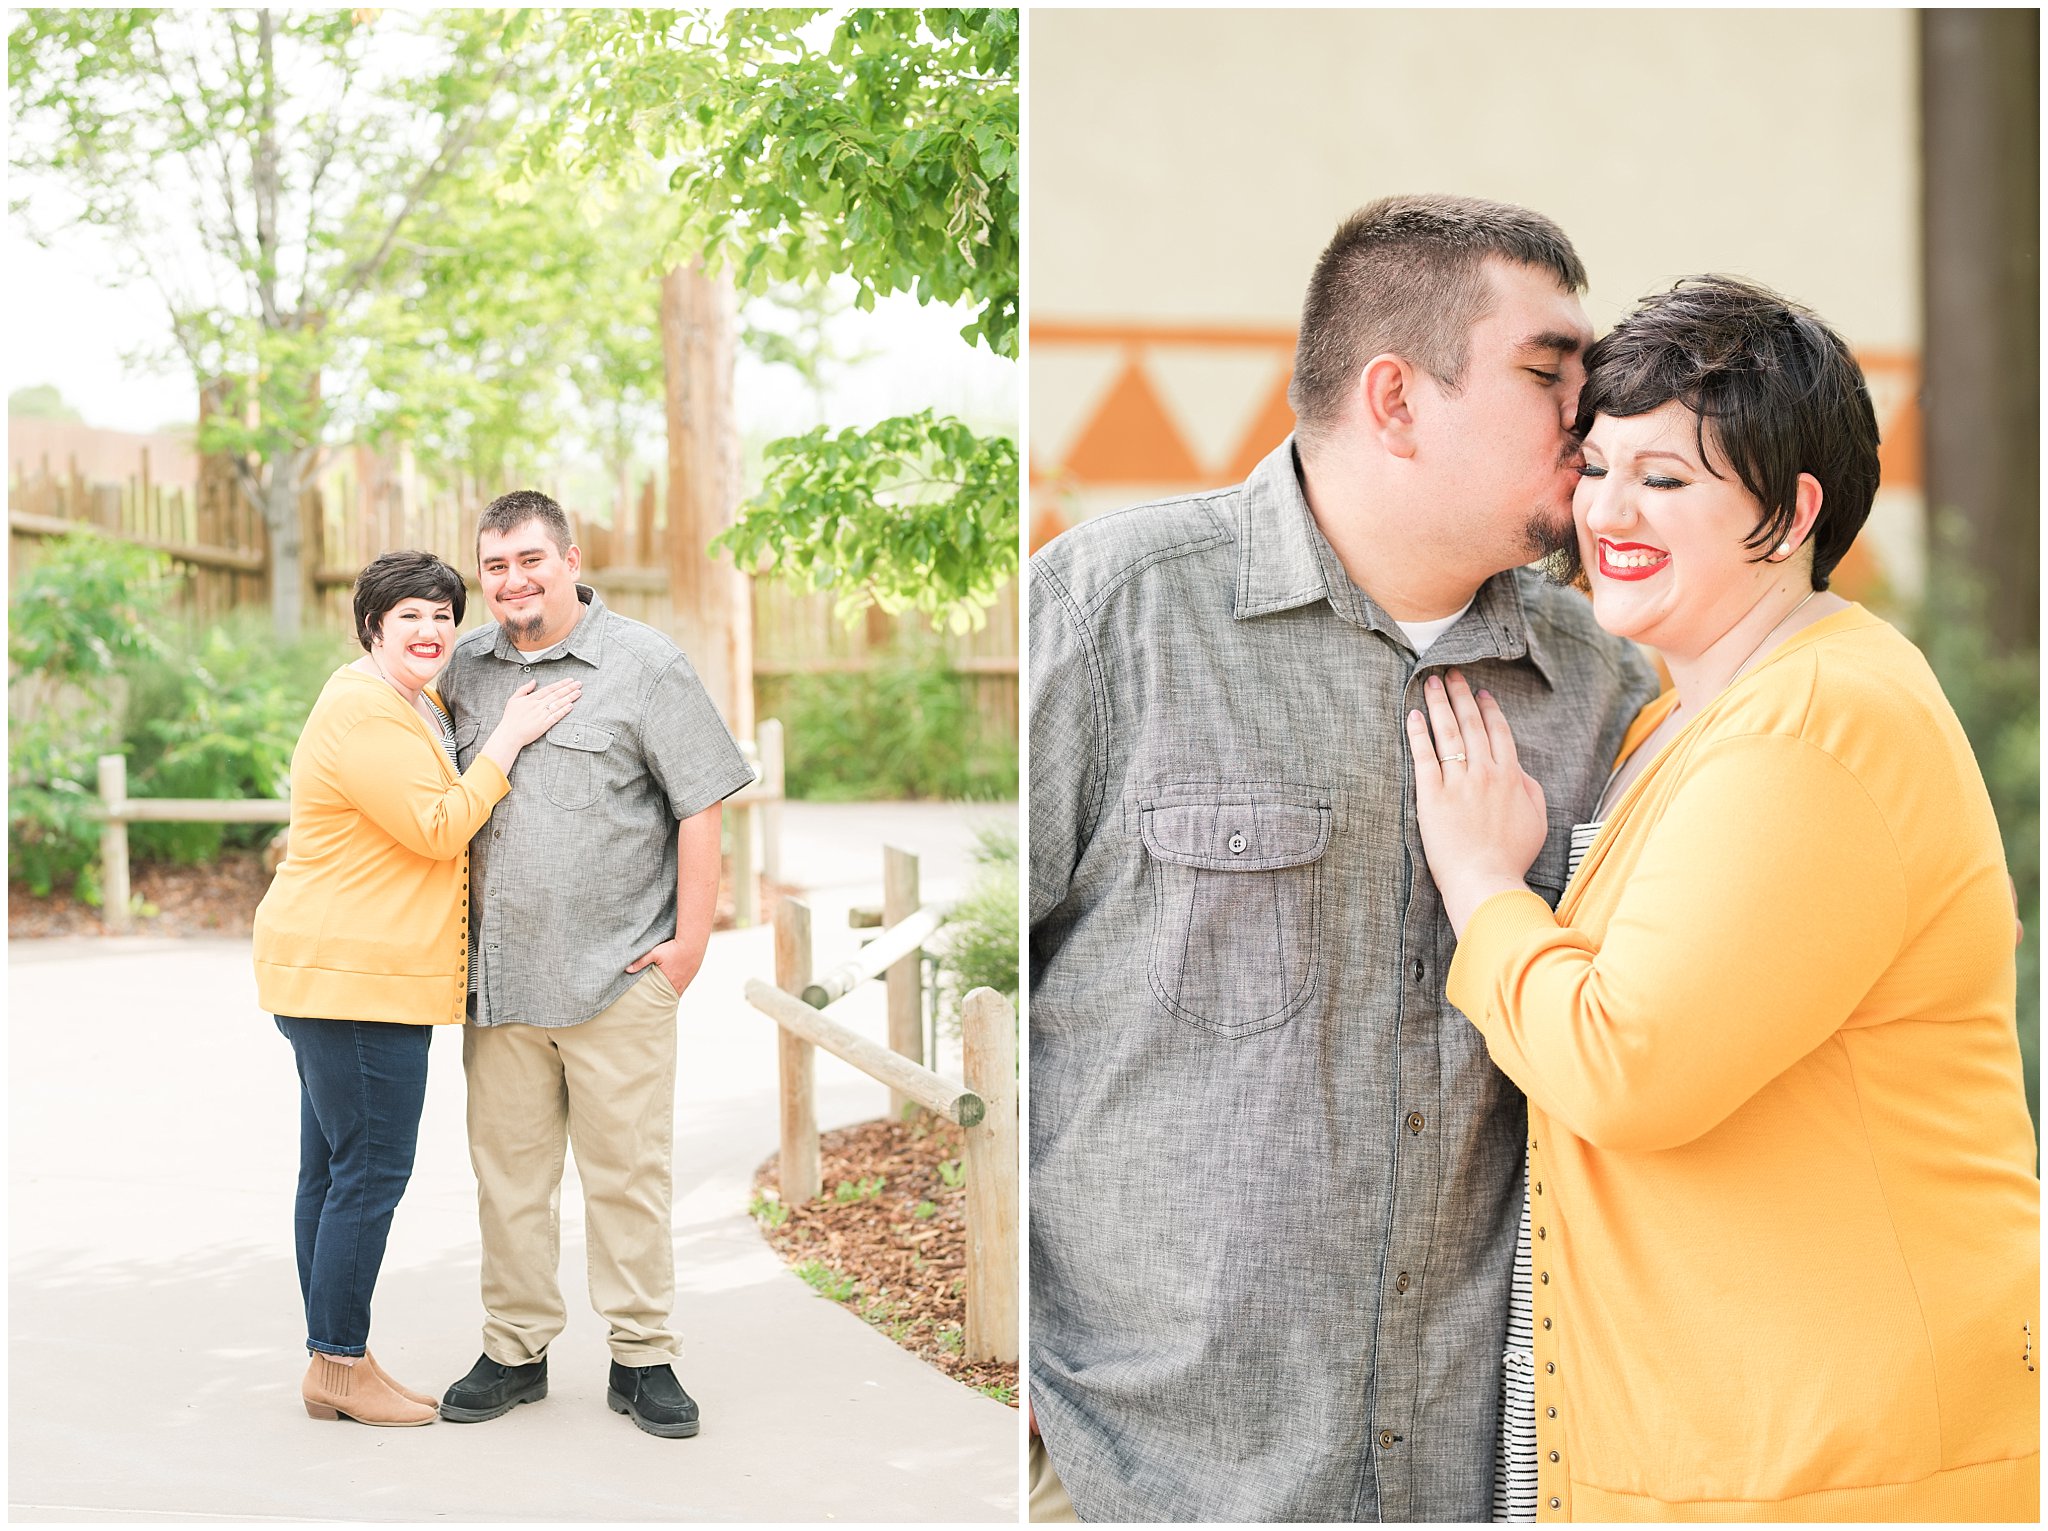 Couple visiting the zoo for their engagement session | Hogle Zoo Engagement Session | Fun and unique engagement | Utah Engagement Photography | Jessie and Dallin Photography